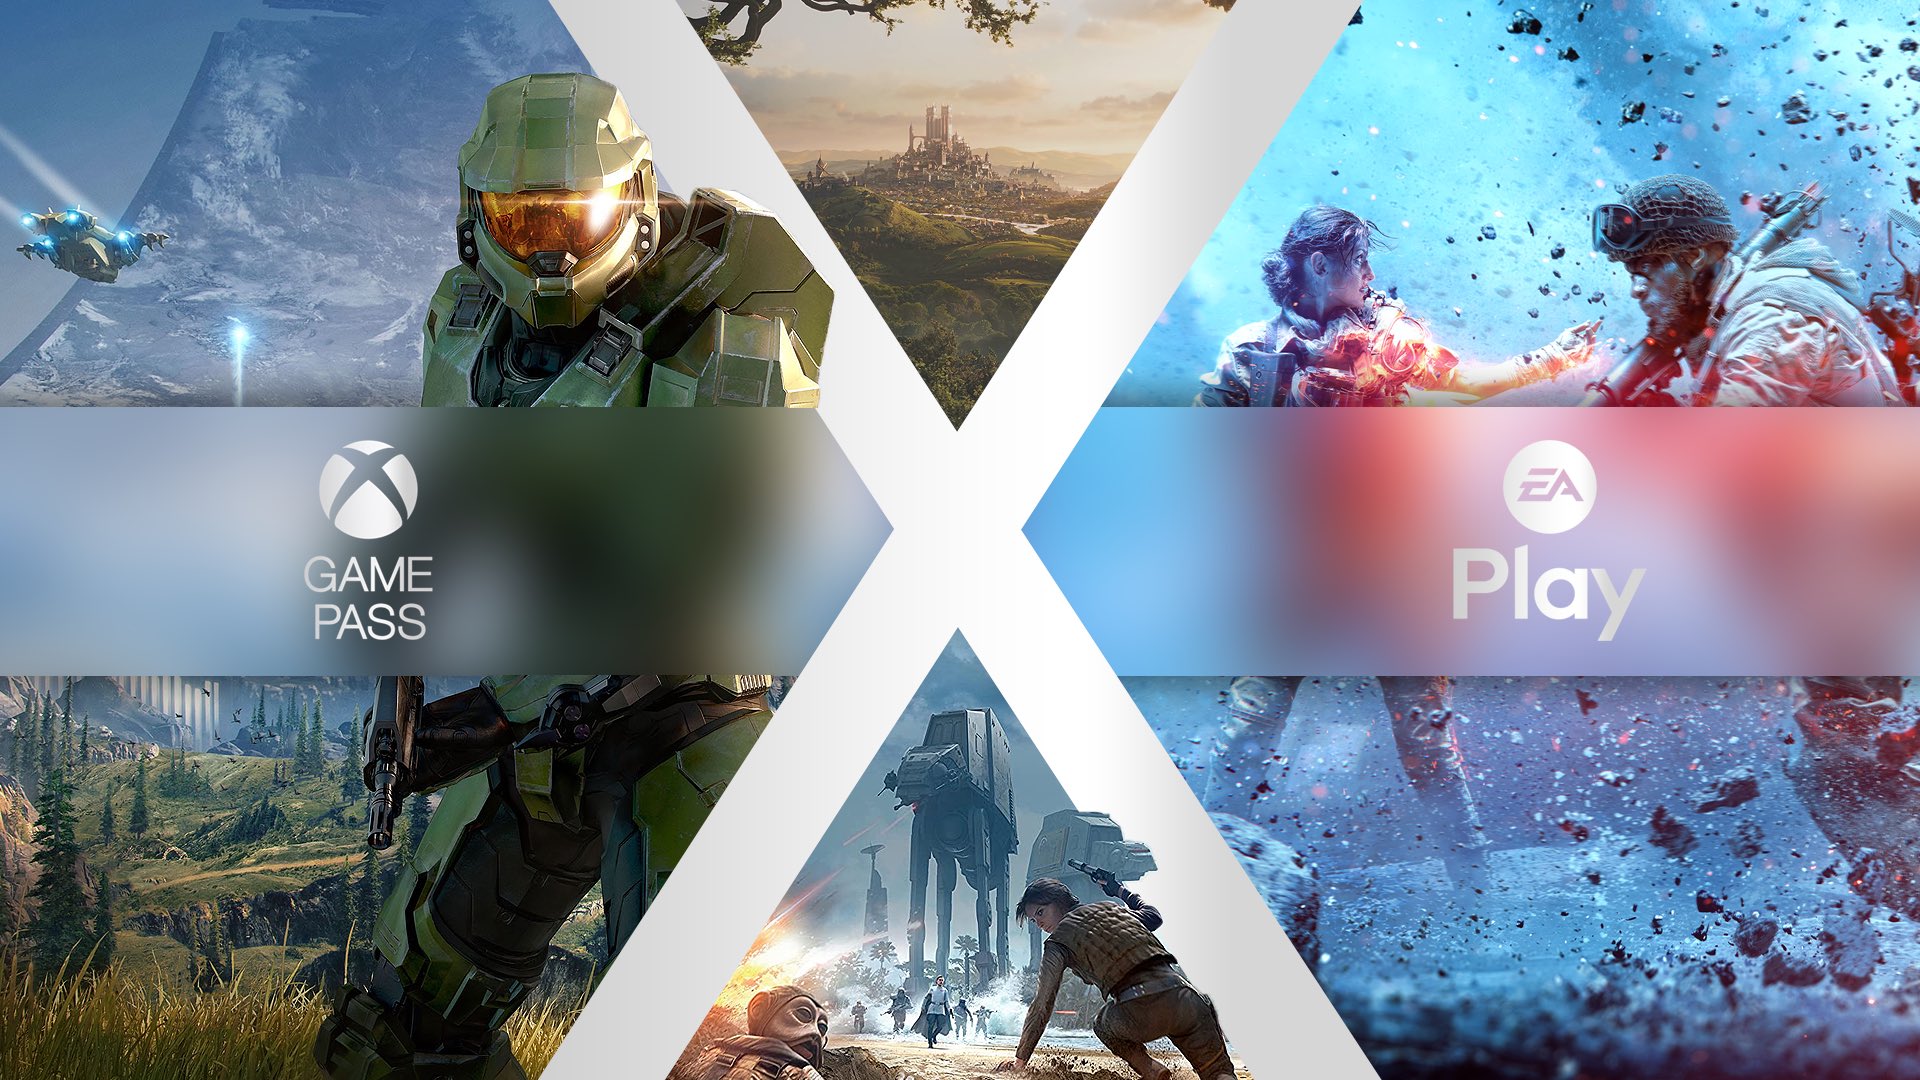 Klobrille on X: Star Wars. Battlefield. Need for Speed. Titanfall. Mass  Effect. Dragon Age. FIFA. Madden. NHL. Some of the worlds biggest  franchises are coming to Xbox Game Pass with EA Play.